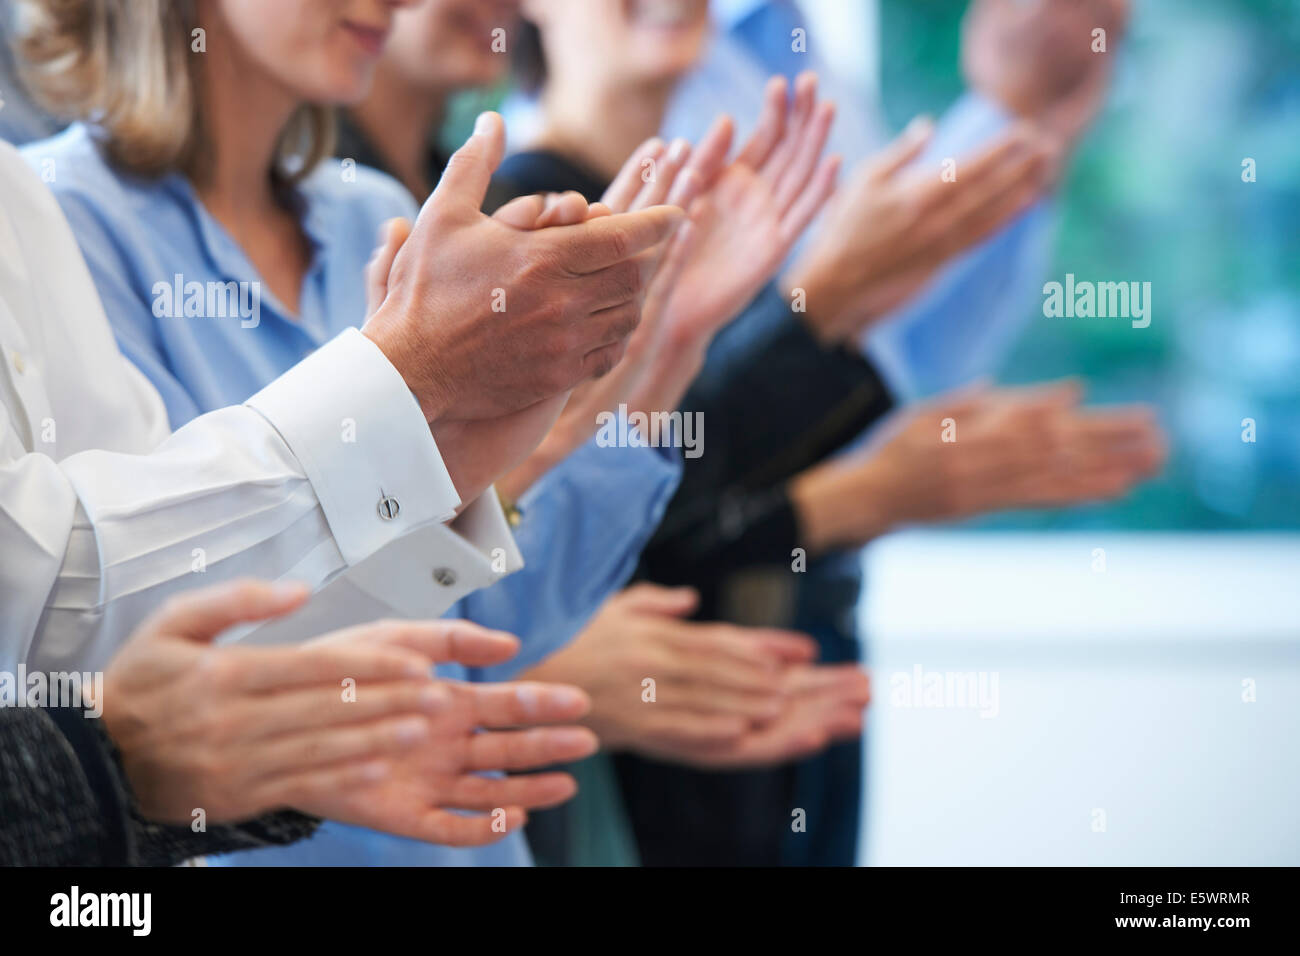 Cropped image of hands clapping Stock Photo